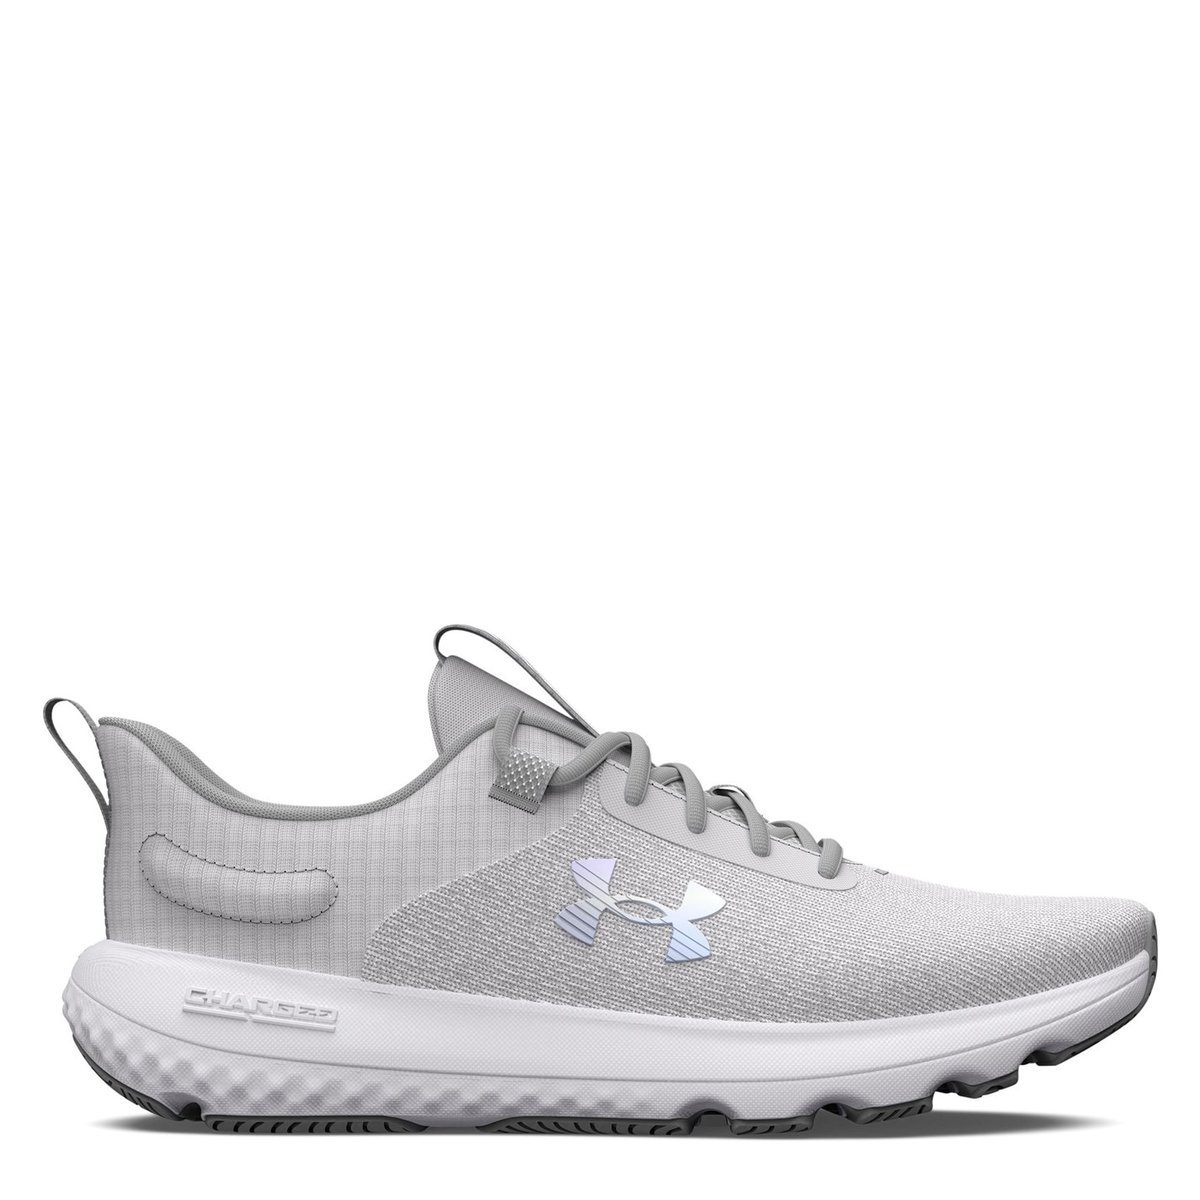 Under Armour Charged Revitalize Running Shoes Womens Halo Grey, £40.00